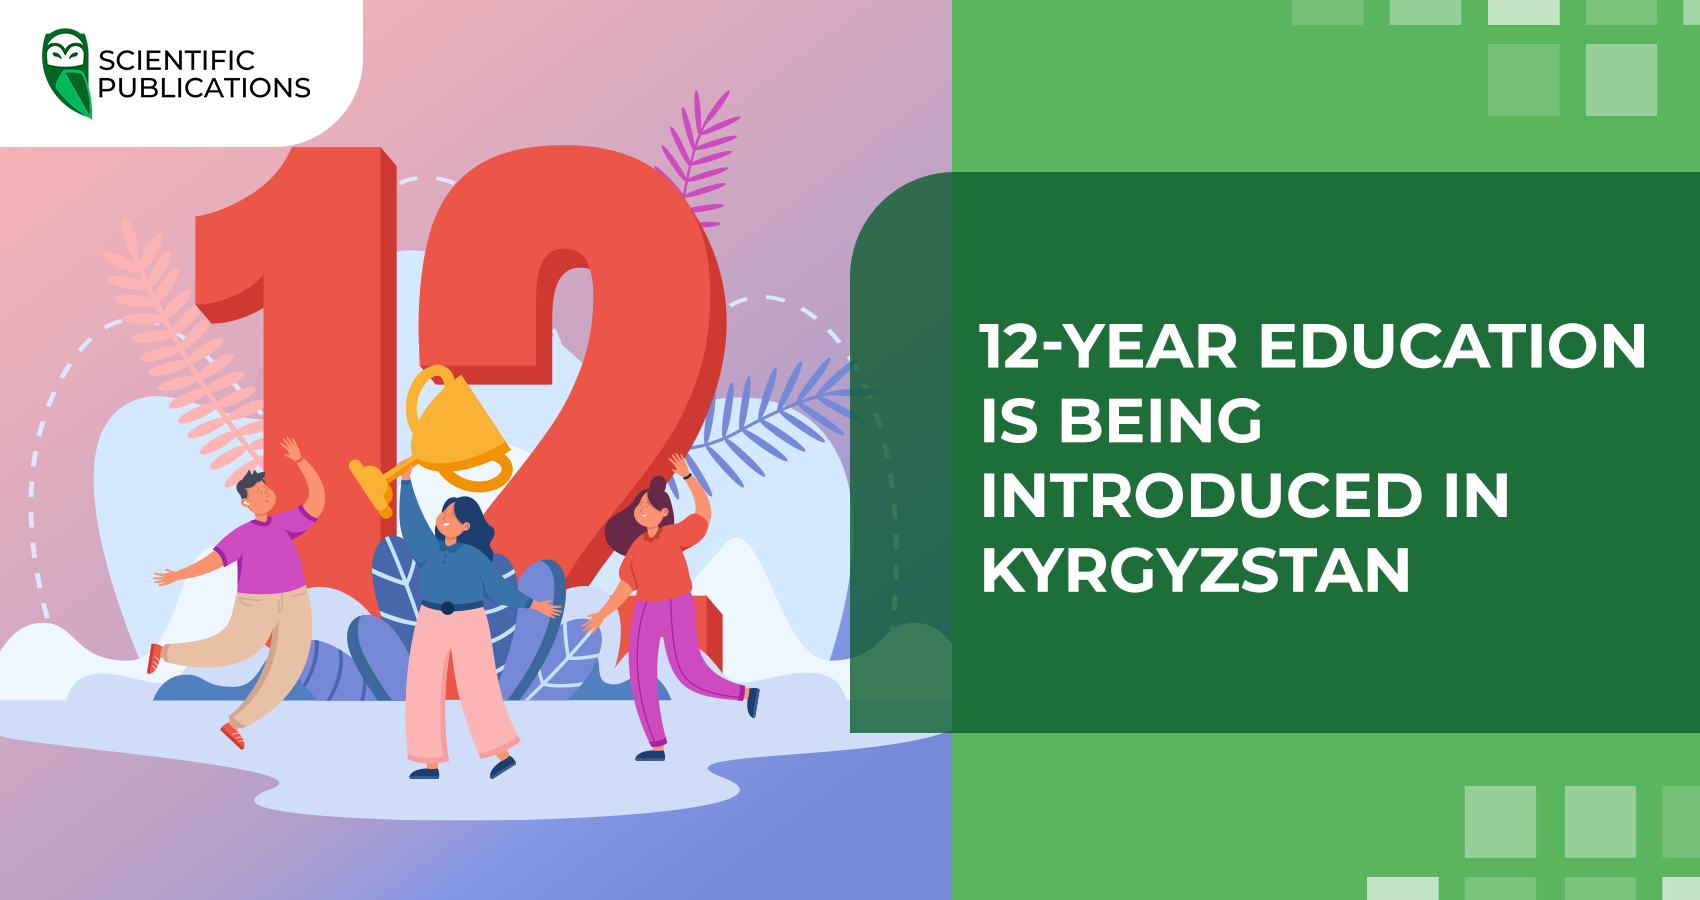 12-year education is being introduced in Kyrgyzstan